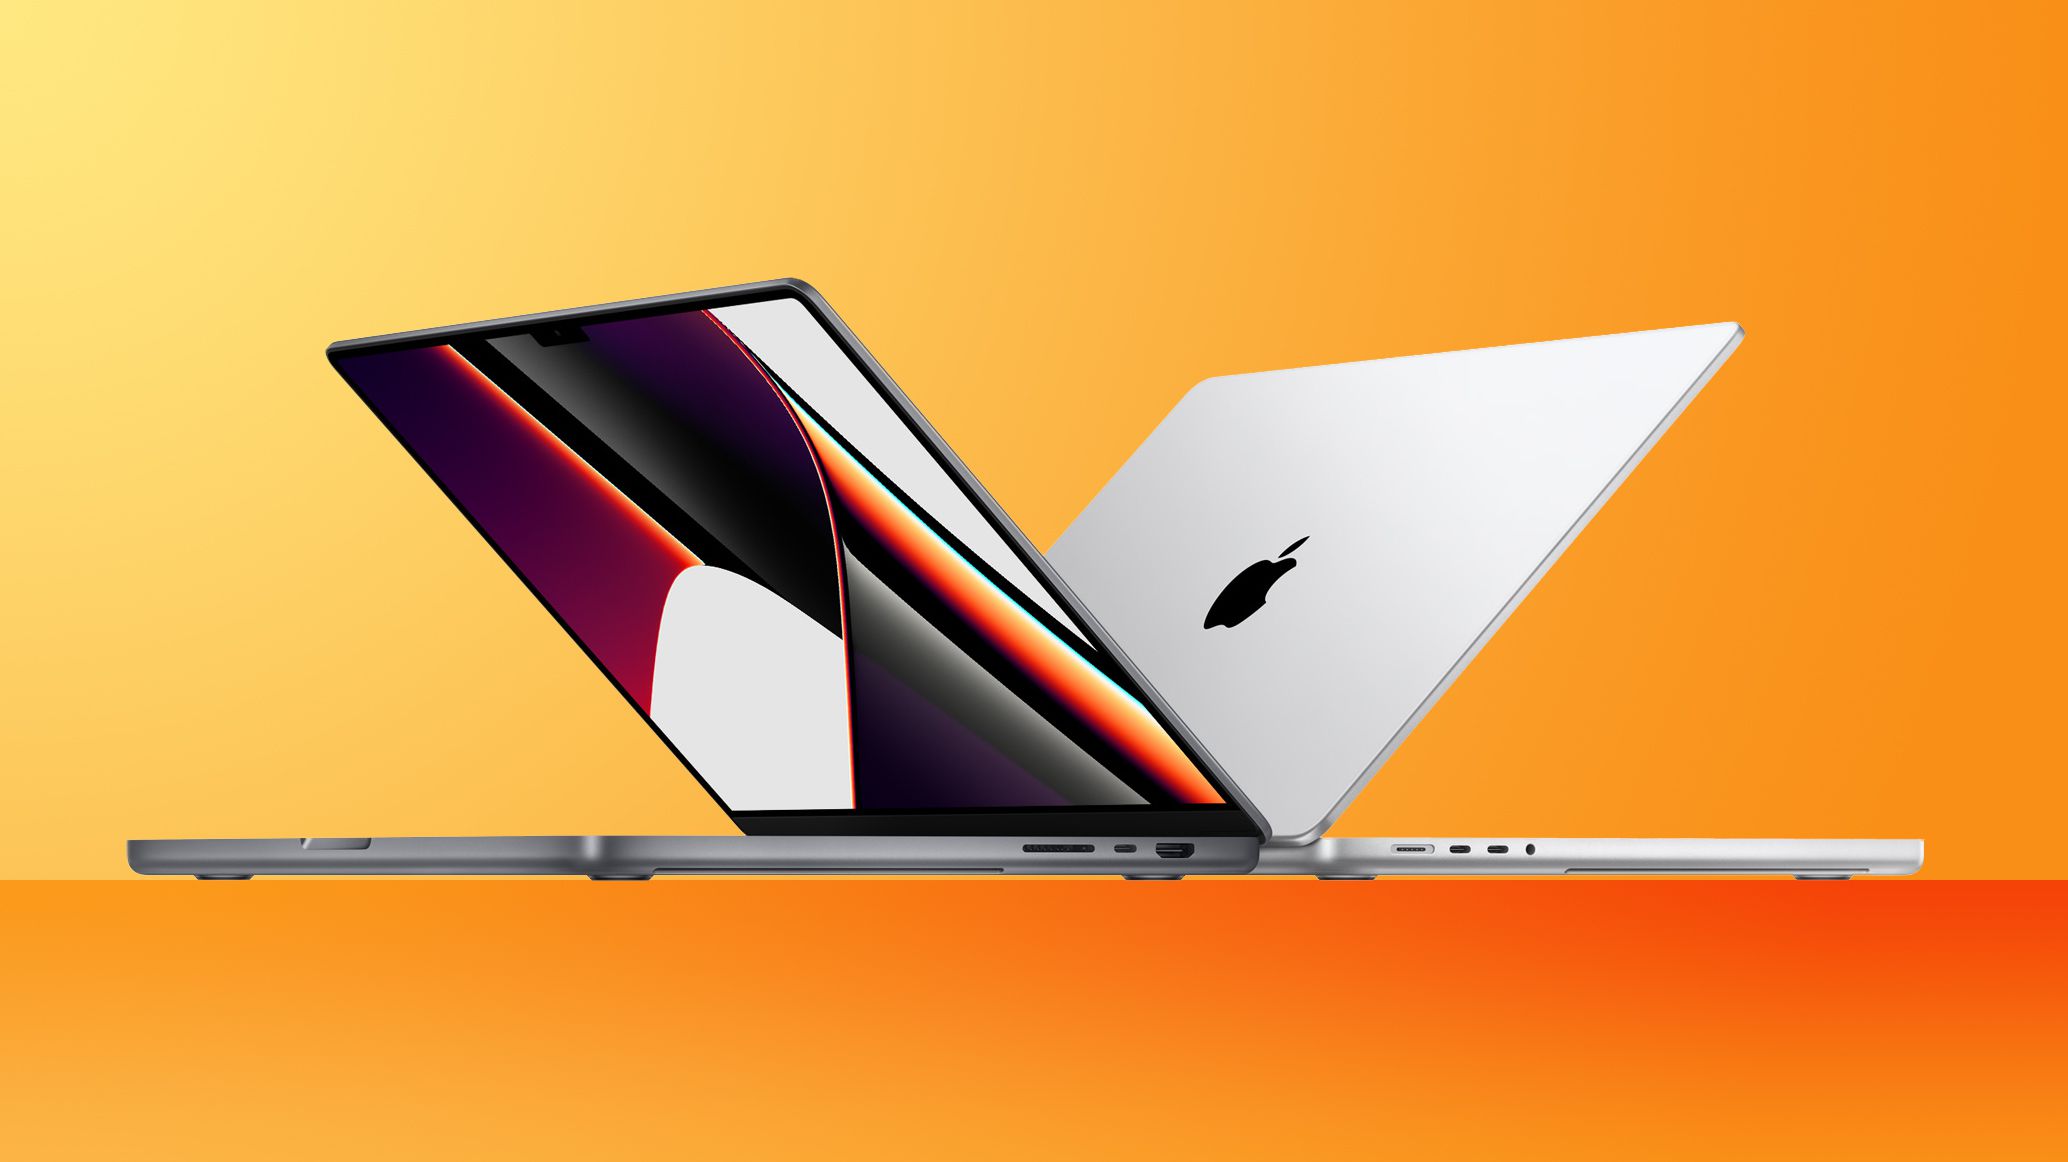 What to expect from the next-generation 14-inch and 16-inch MacBook Pros